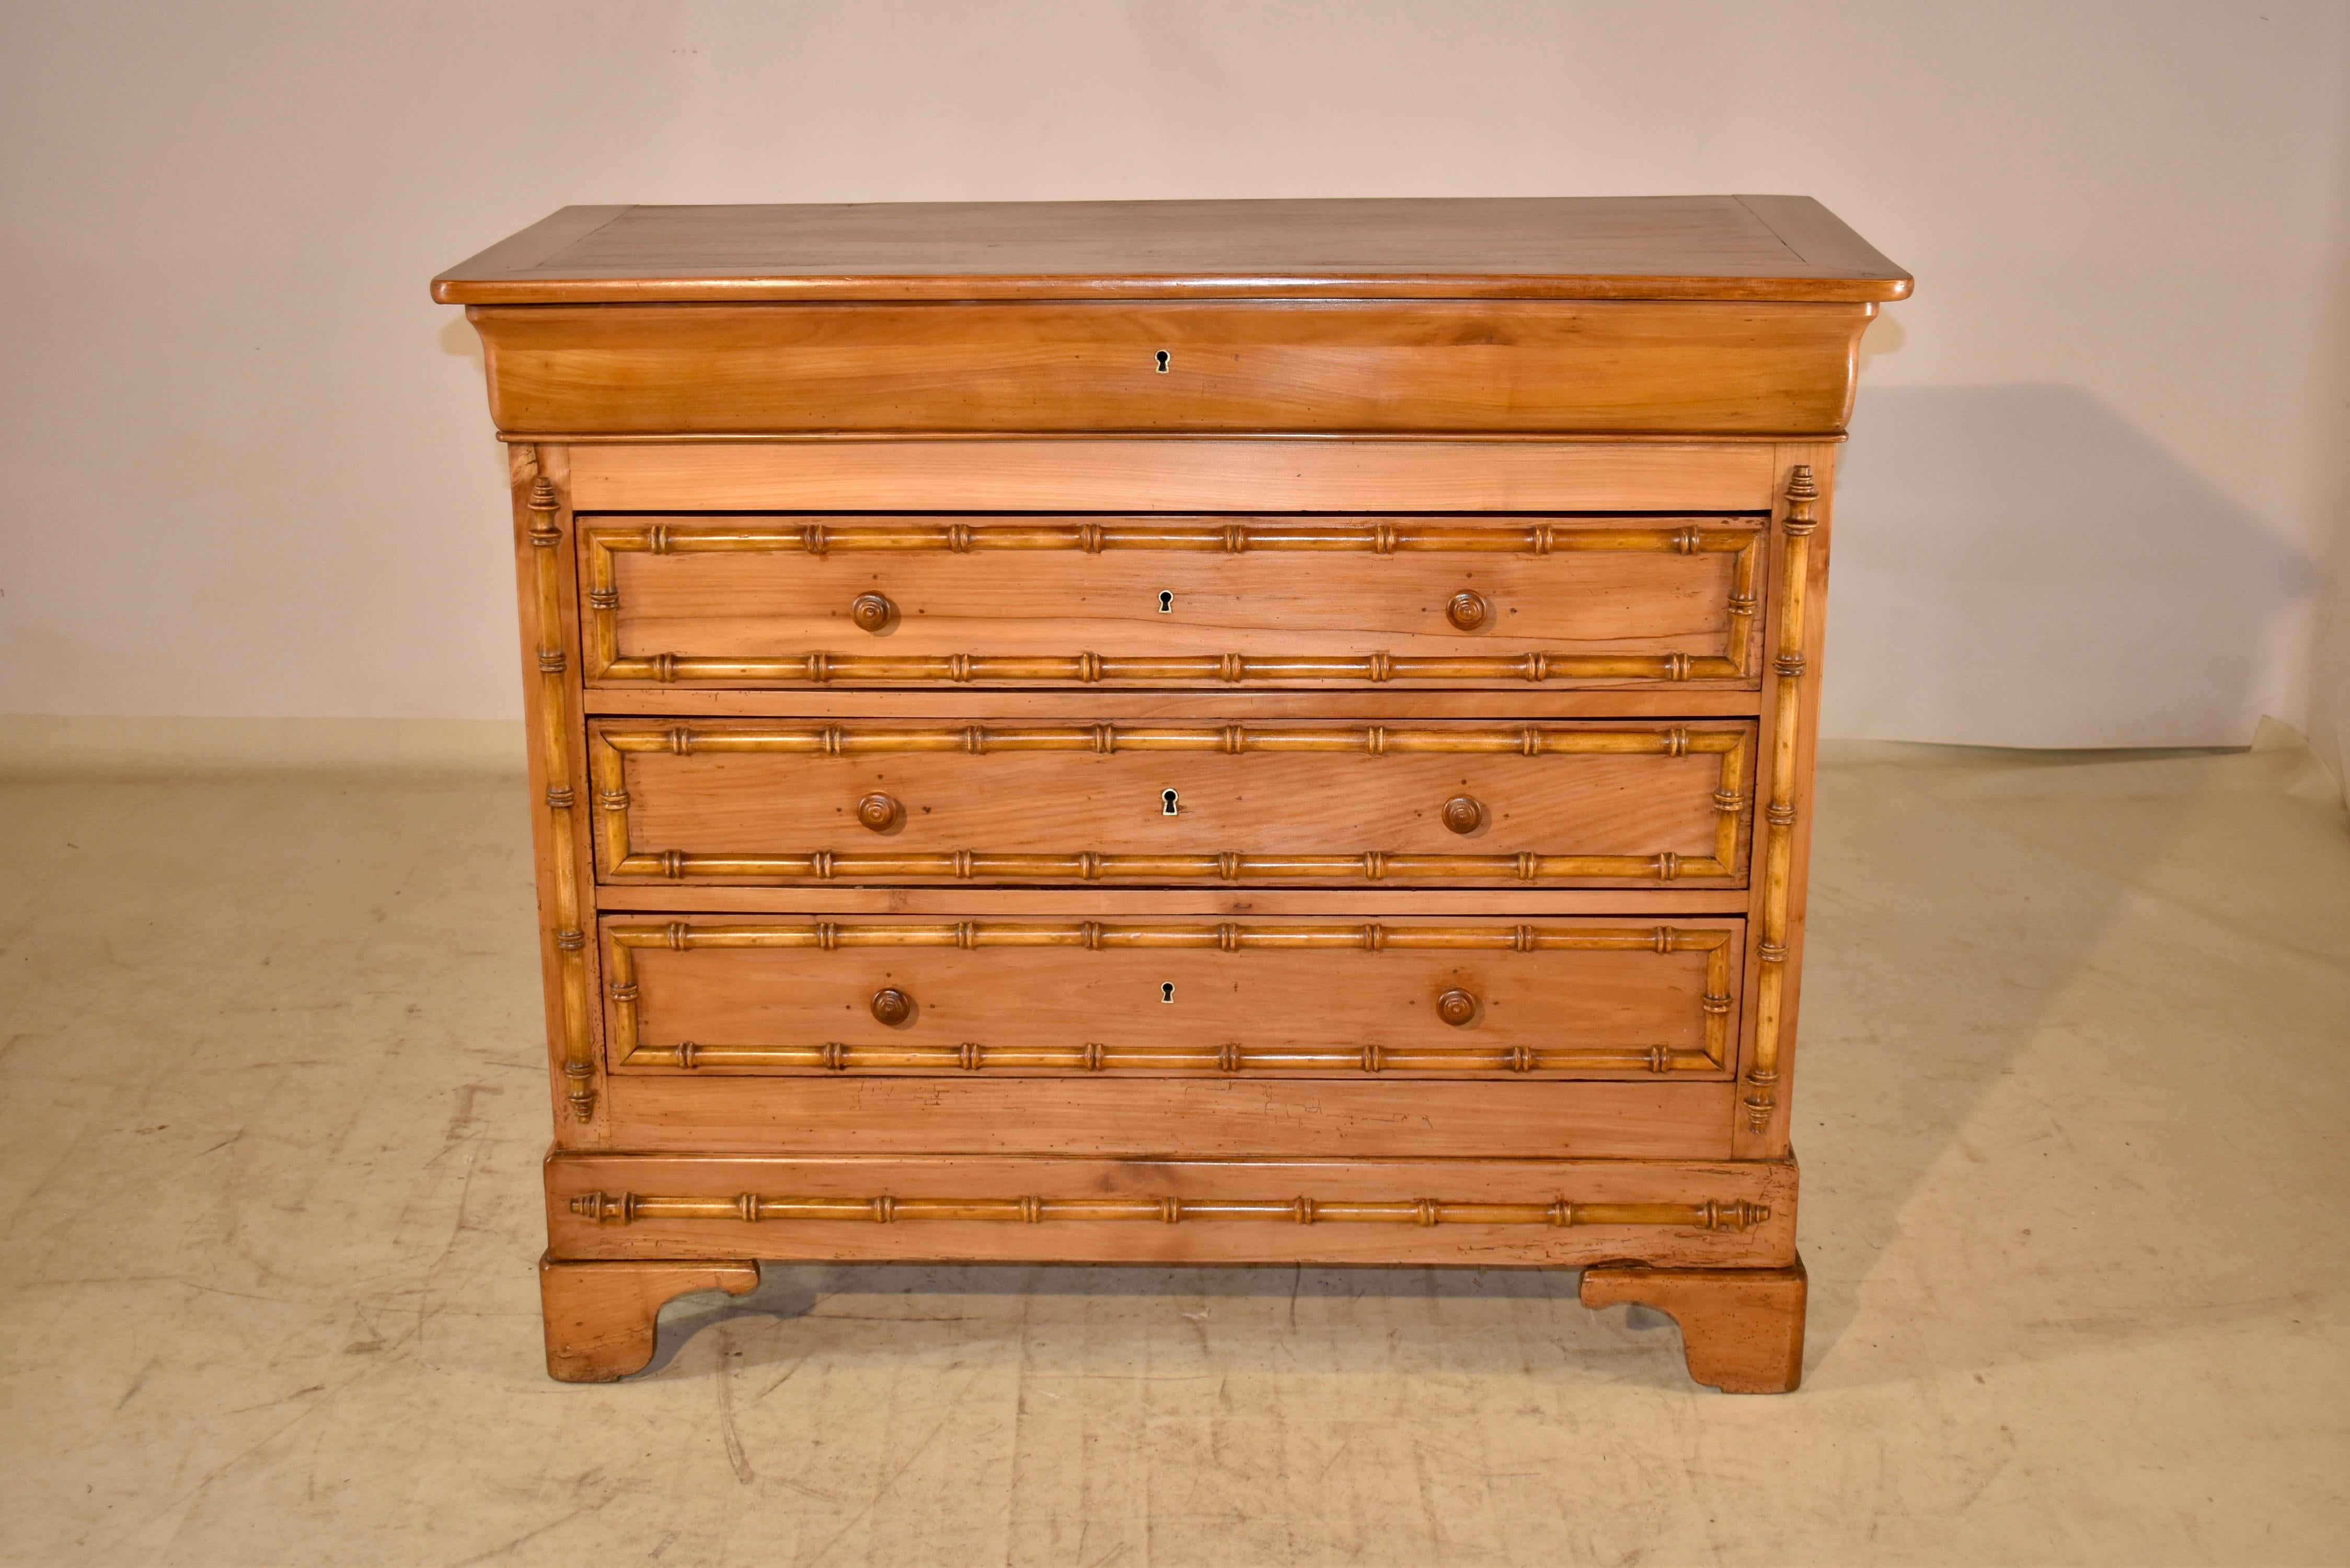 19th century cherry commode from France. The top is banded and is wonderfully figured. The sides are simple and paneled, and the front of the case has a molded apron, which is a hidden drawer, over three drawers, all with faux bamboo molded accents.